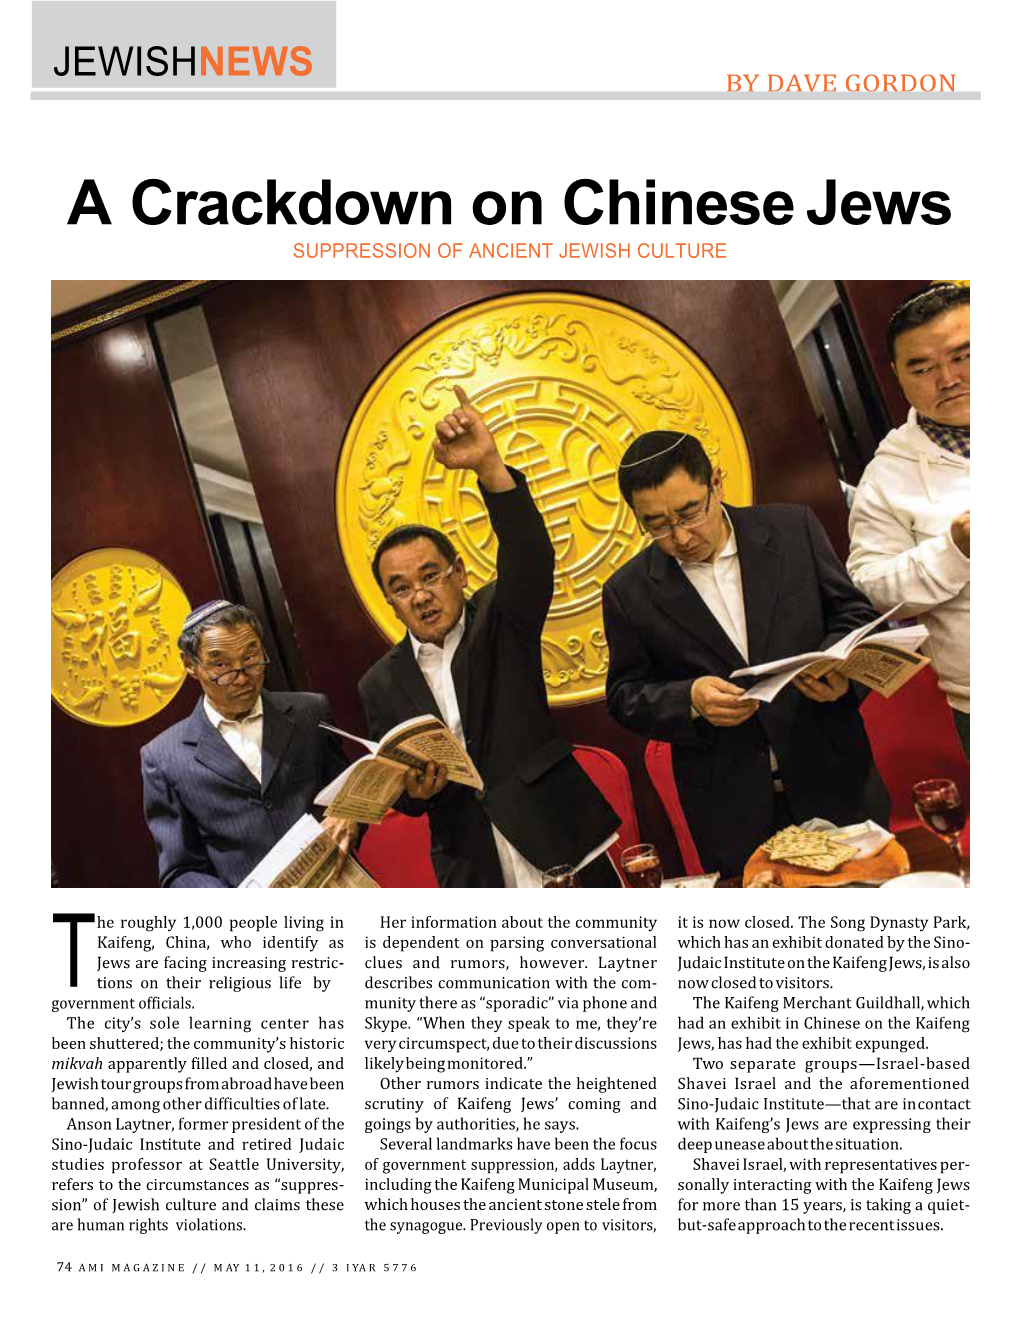 A Crackdown on Chinese Jews SUPPRESSION of ANCIENT JEWISH CULTURE